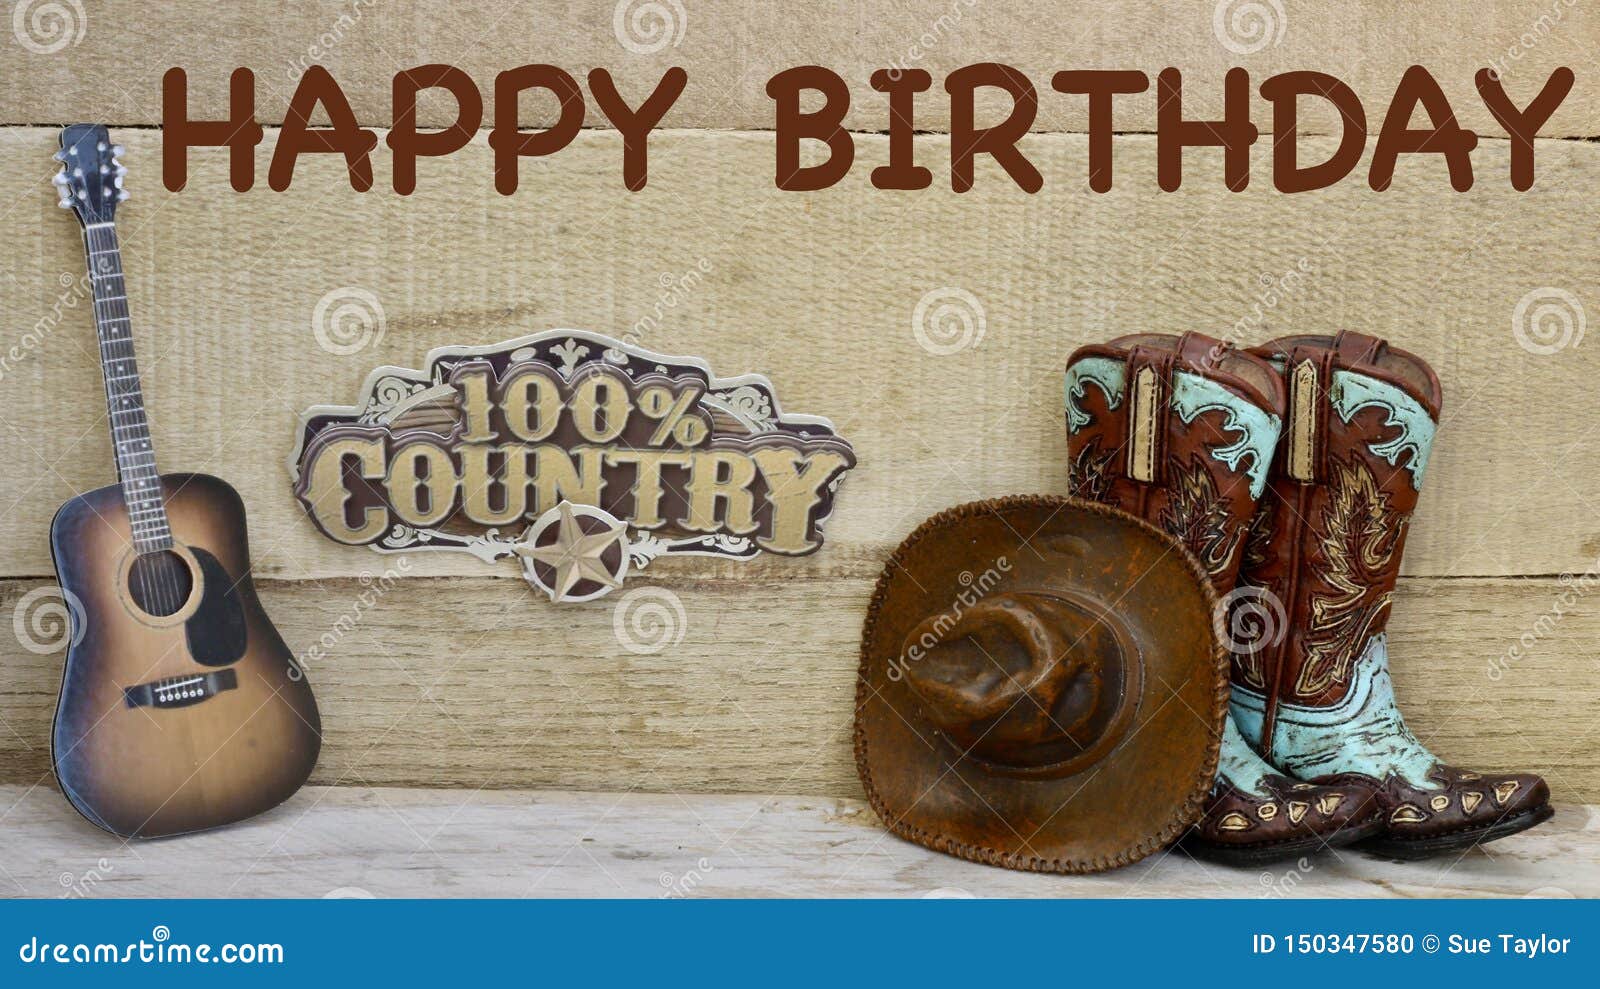 Cowboy boots hat and guitar standing on a wood background with happy birthd...